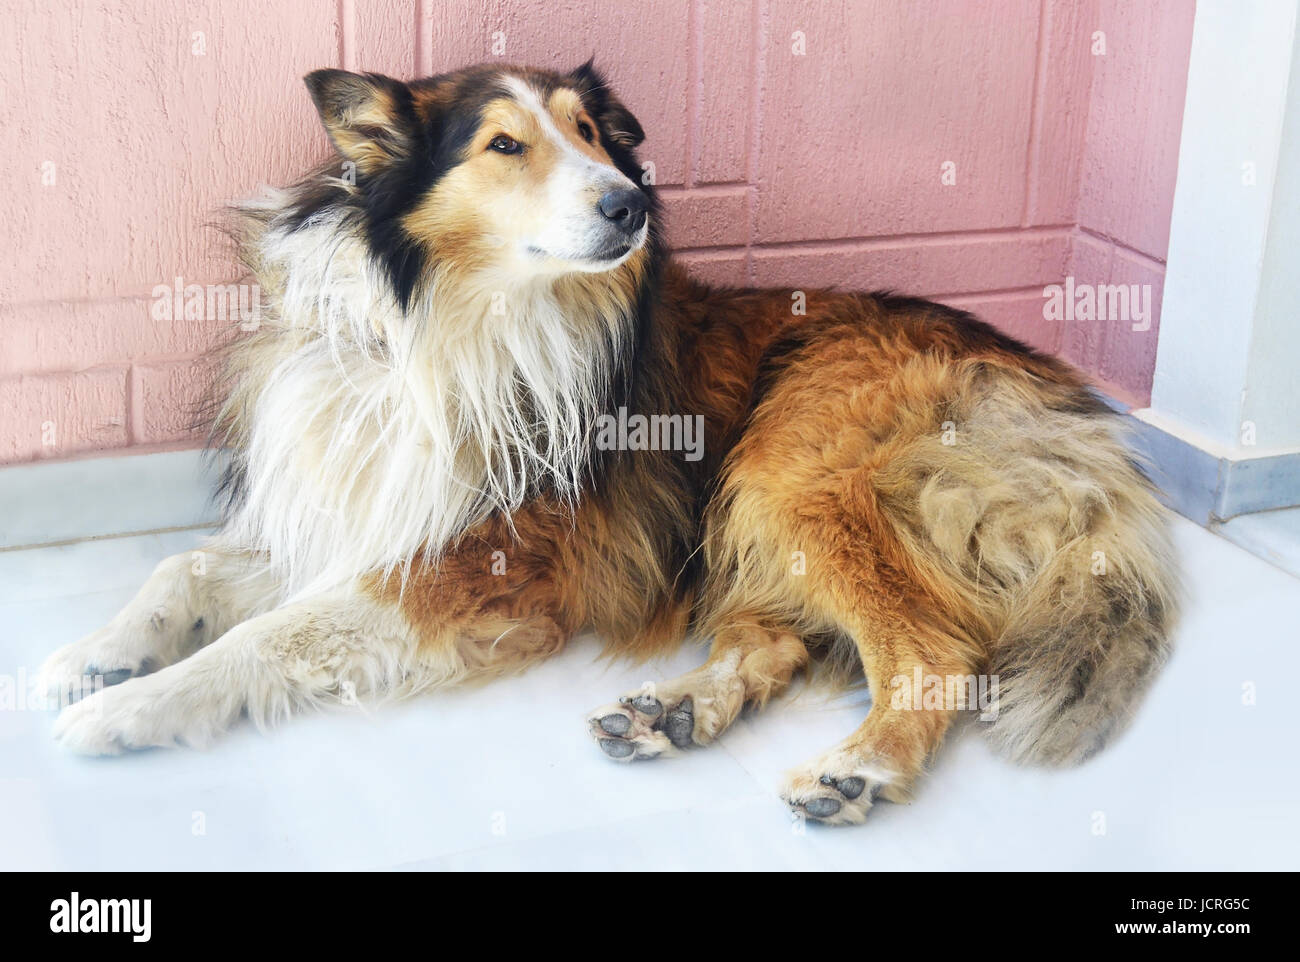 Lassie - A Dog With Colorful Background